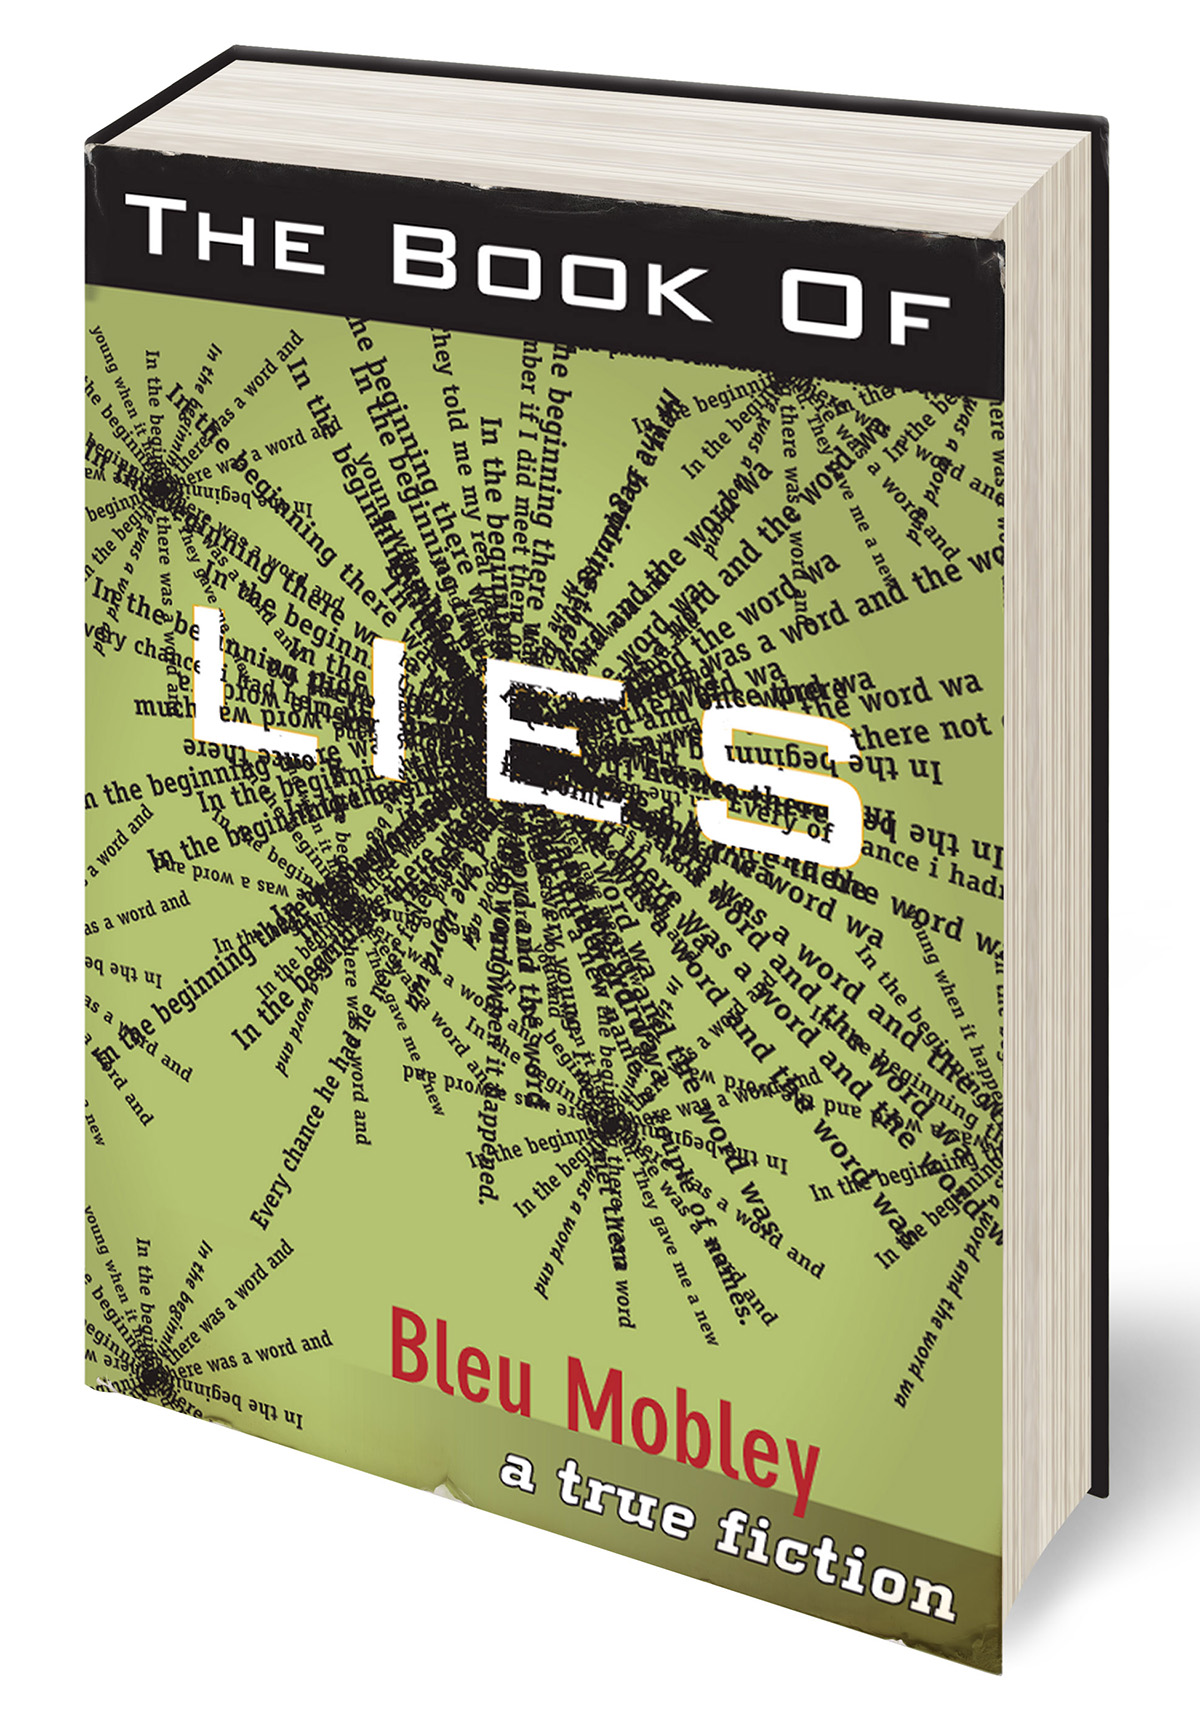 Text of Lies on a green book cover